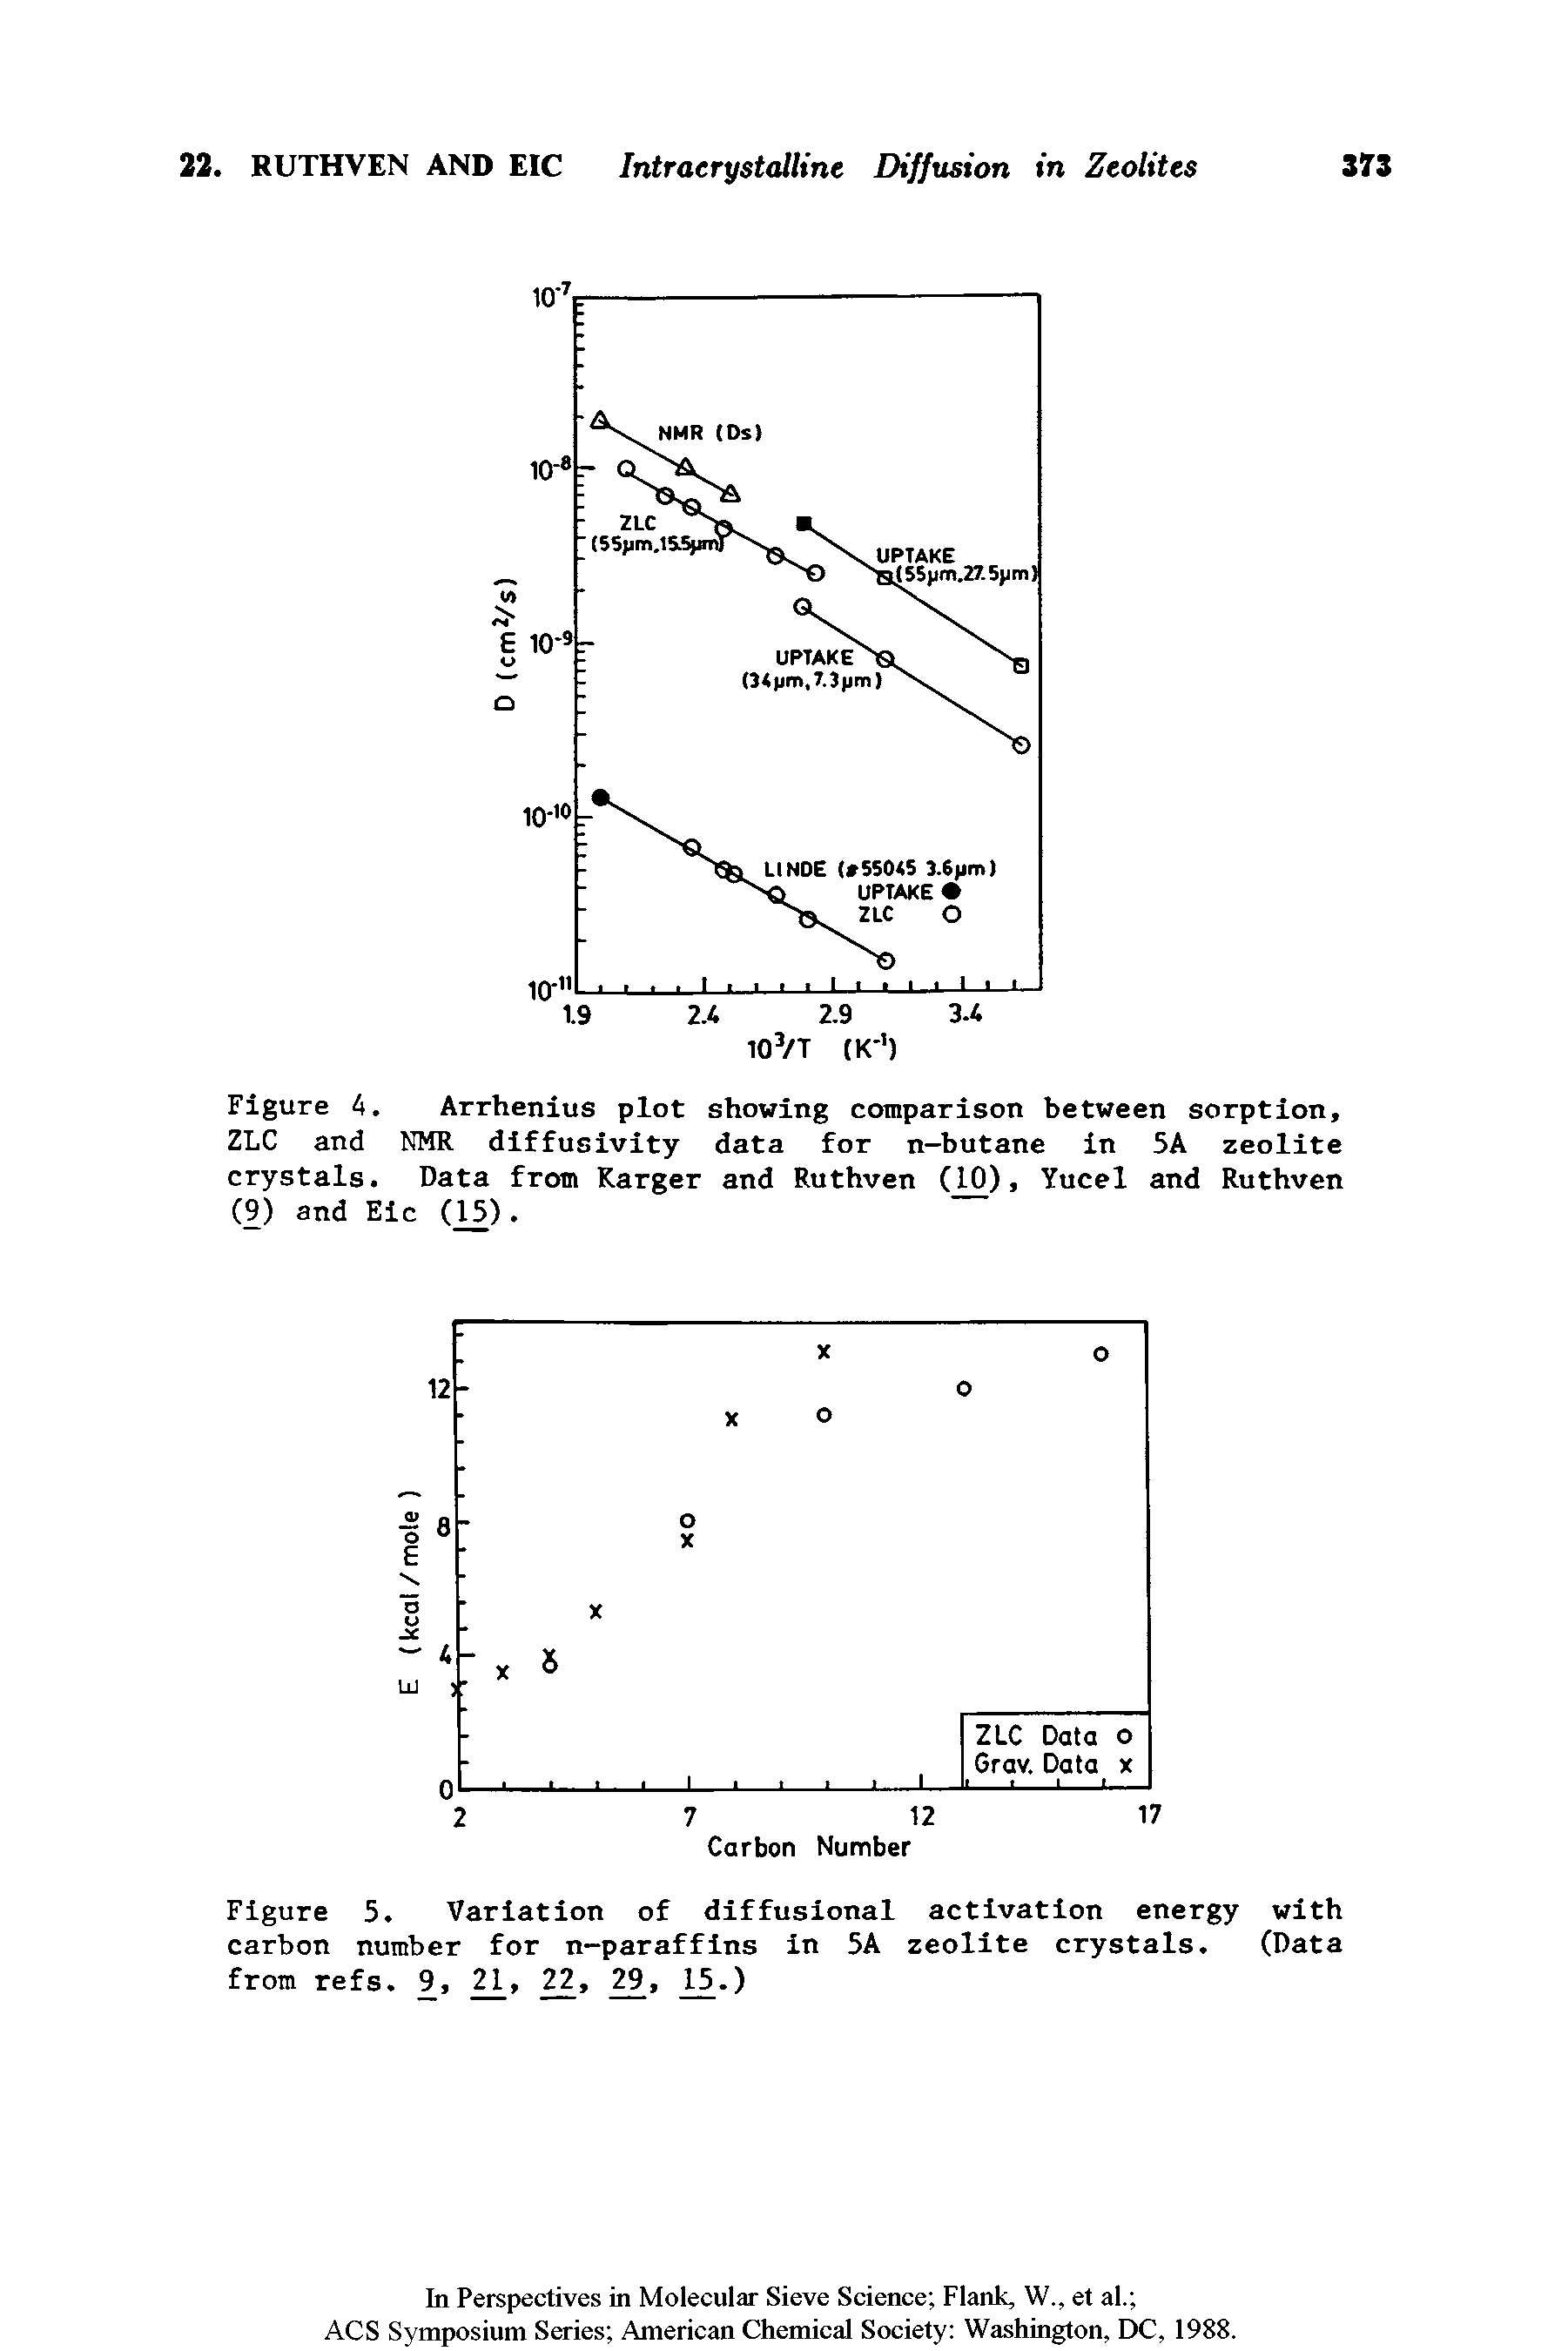 Figure 4. Arrhenius plot showing comparison between sorption, ZLC and NMR diffusivity data for n-butane in 5A zeolite crystals. Data from Karger and Ruthven (10), Yucel and Ruthven (9) and Eic (15).